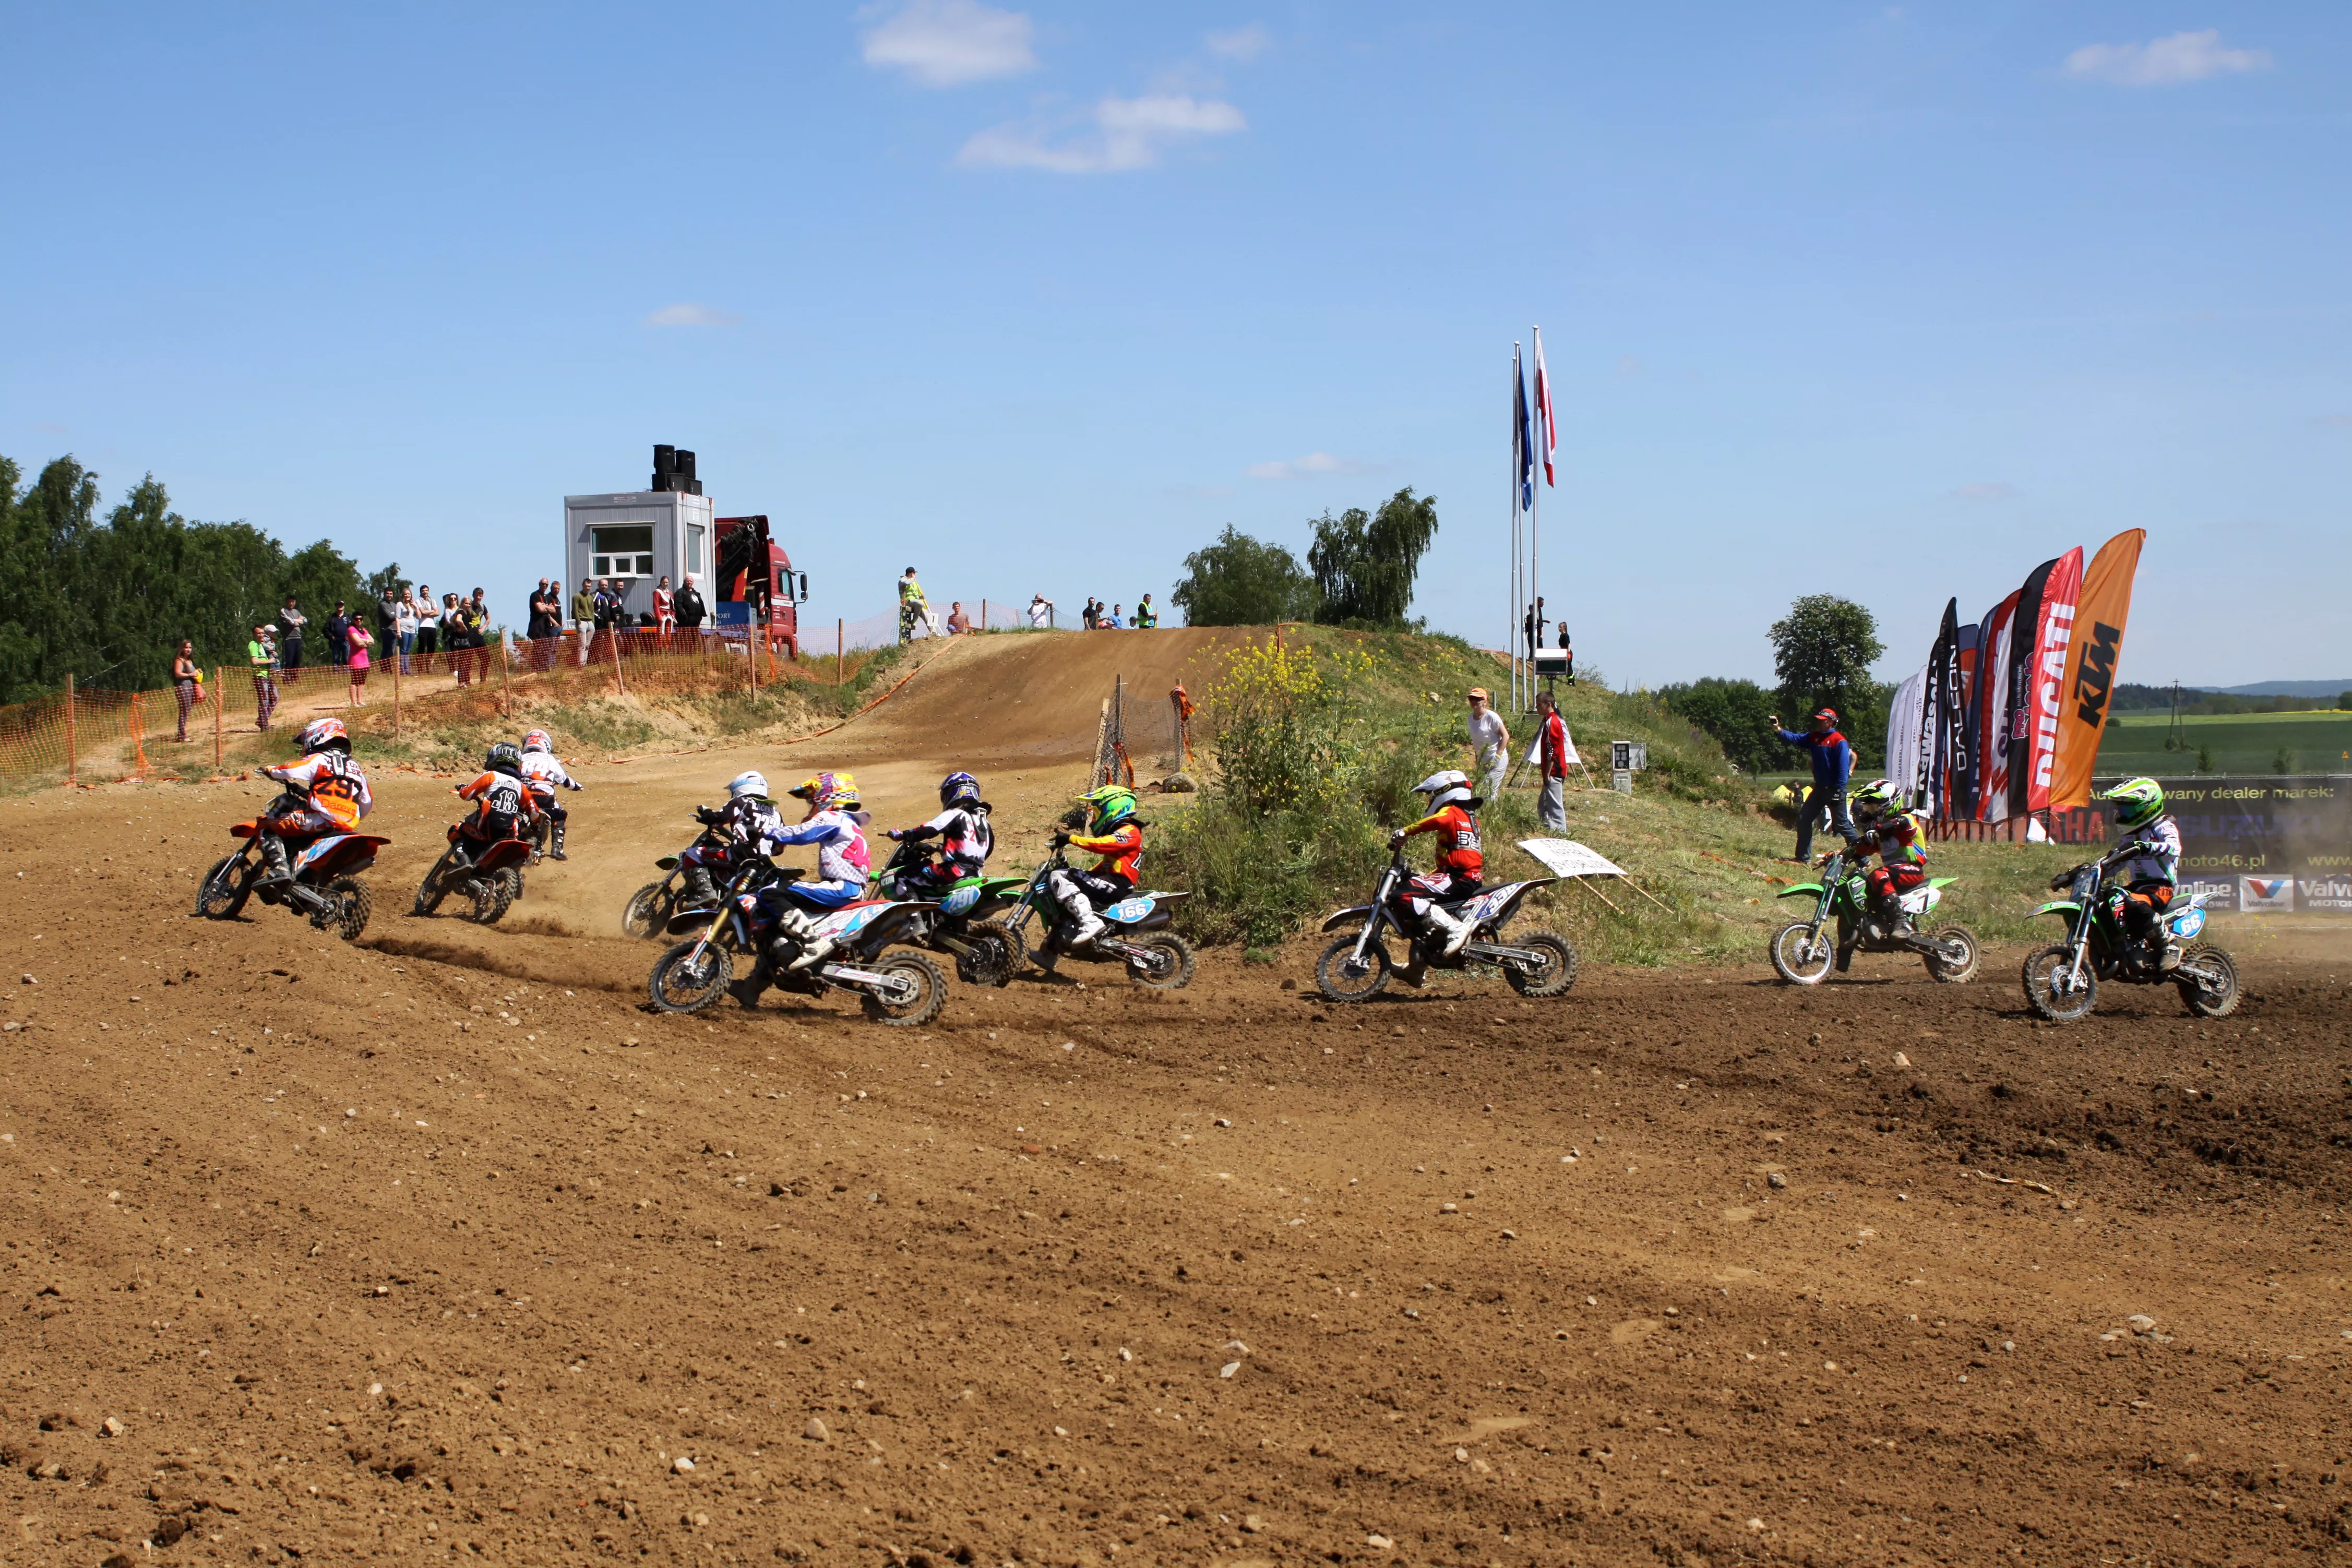 Majorka Motopark - Tor Motocrossowy Albertow in Poland, Europe | Motorcycles - Rated 0.9